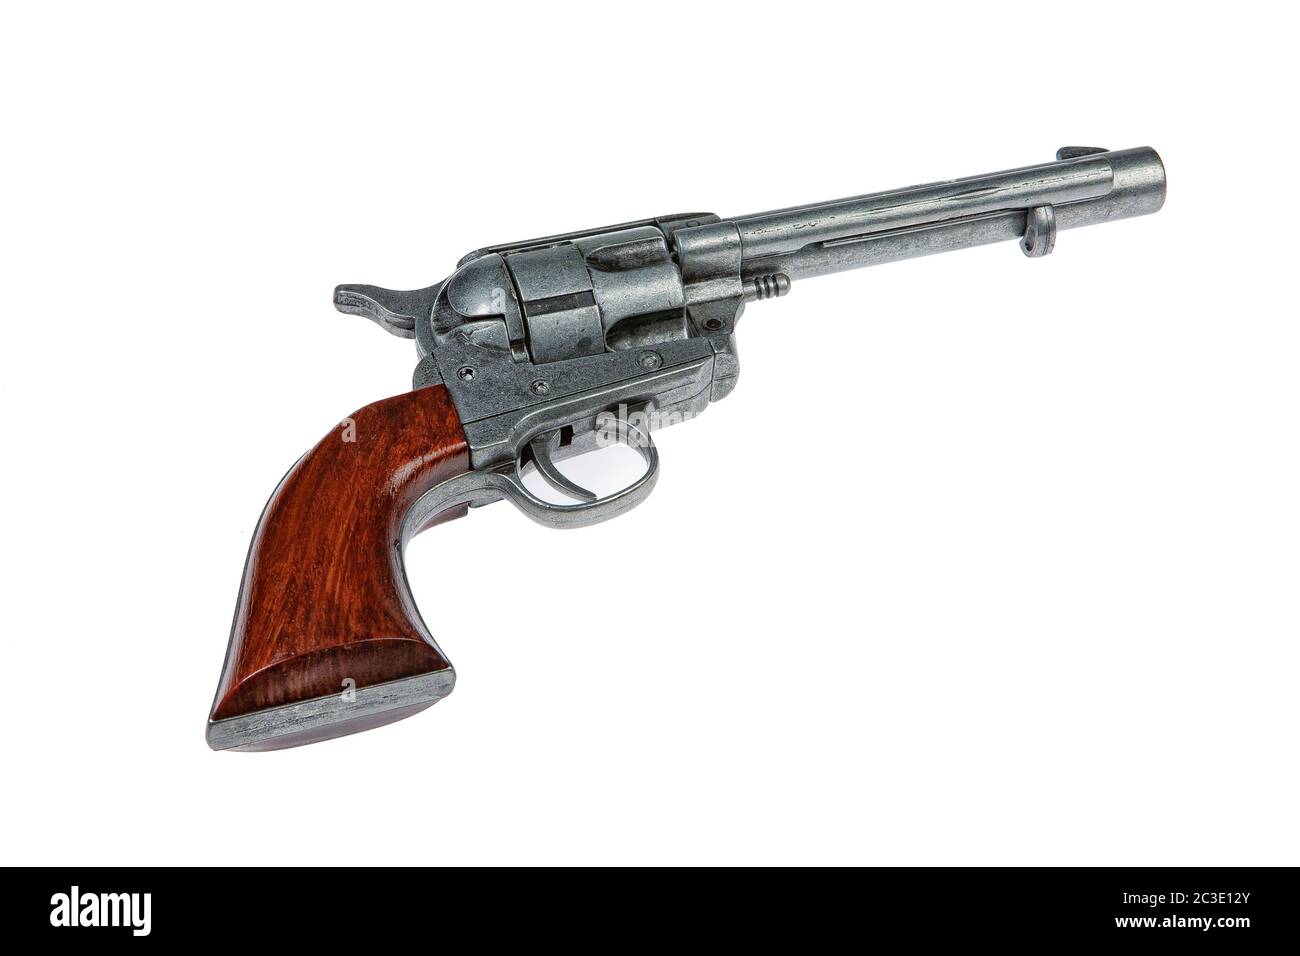 Old Army Single Action Revolver Stock Photo